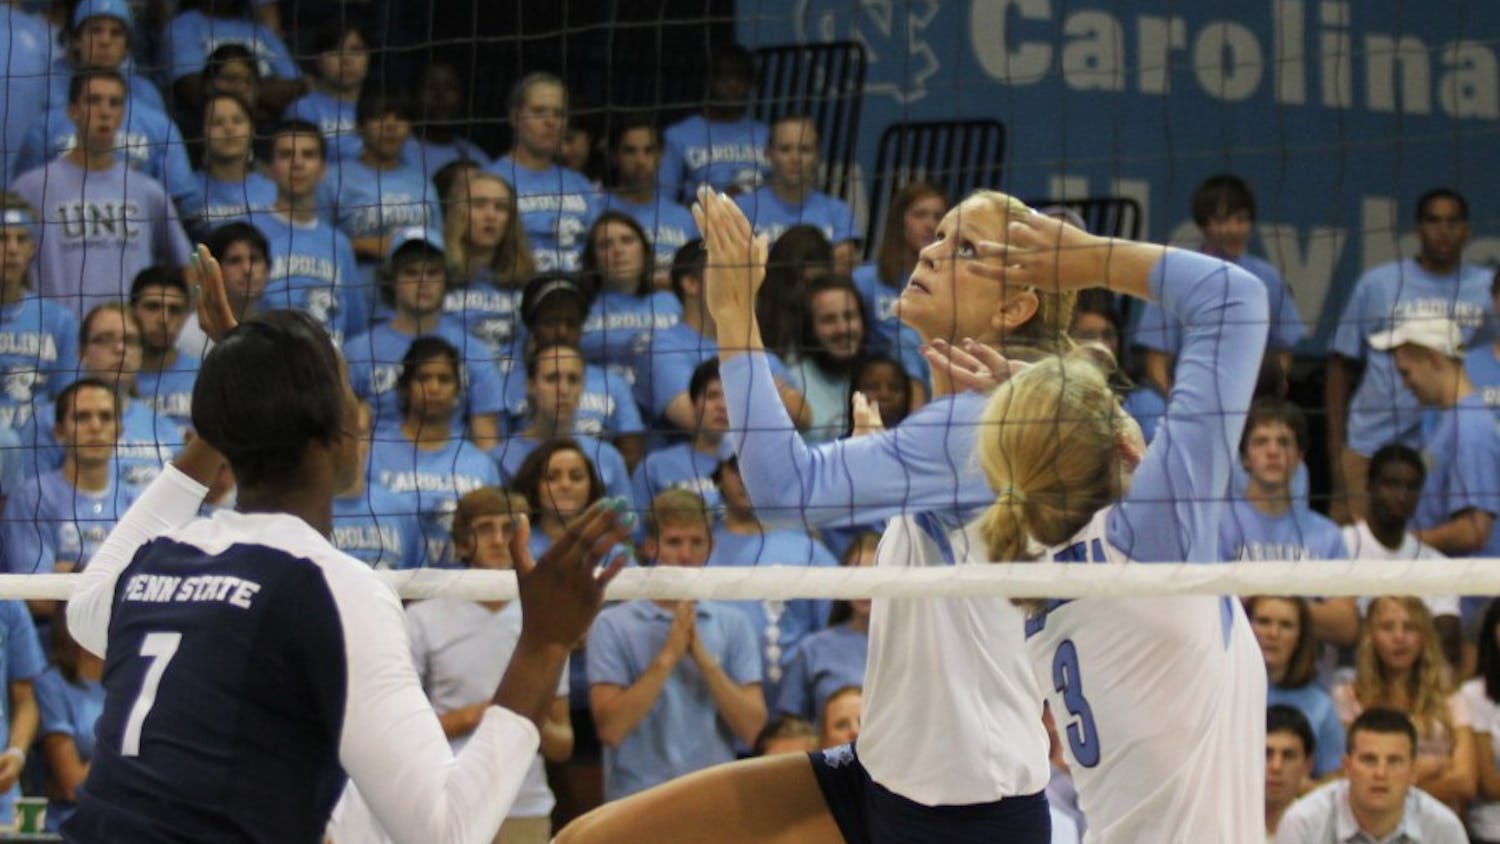 Courtney Johnston keeps her eye on the ball in the Tar Heels’ 3-0 loss to Penn State. North Carolina rebounded with wins over Campbell and Villanova.